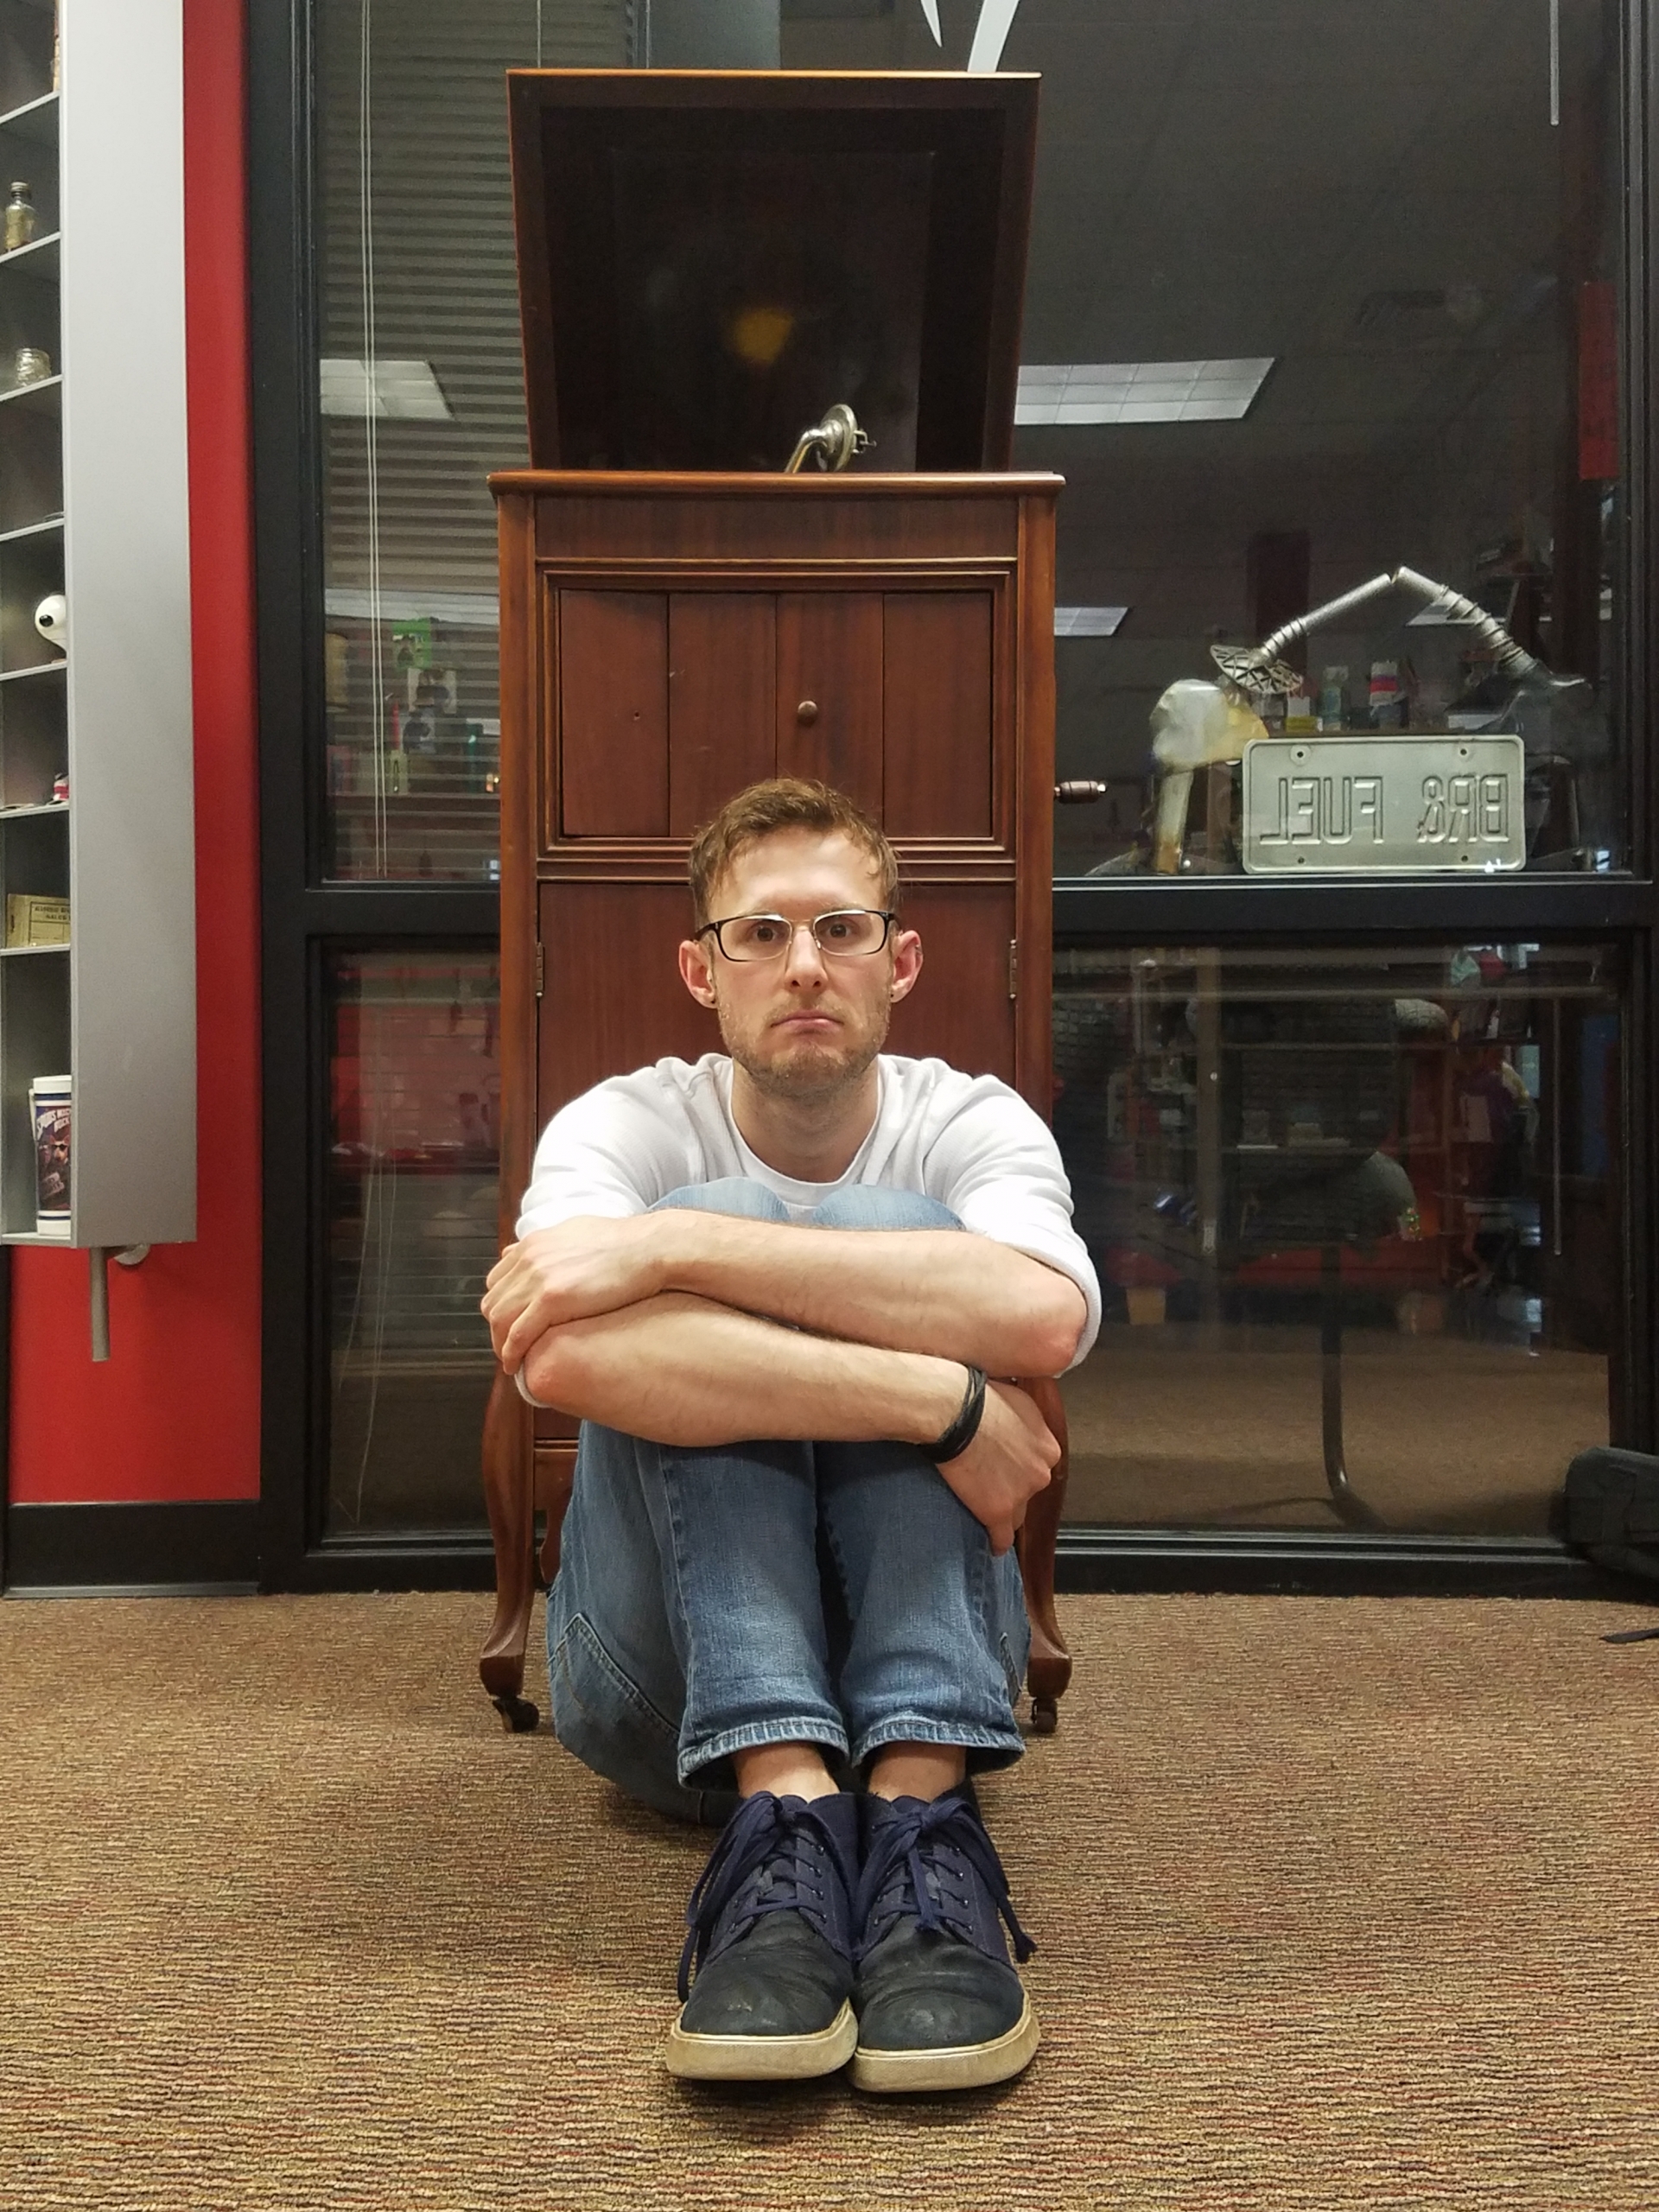 BrandFuel employee Blake Waller sitting on the floor with his arms crossed over his knees